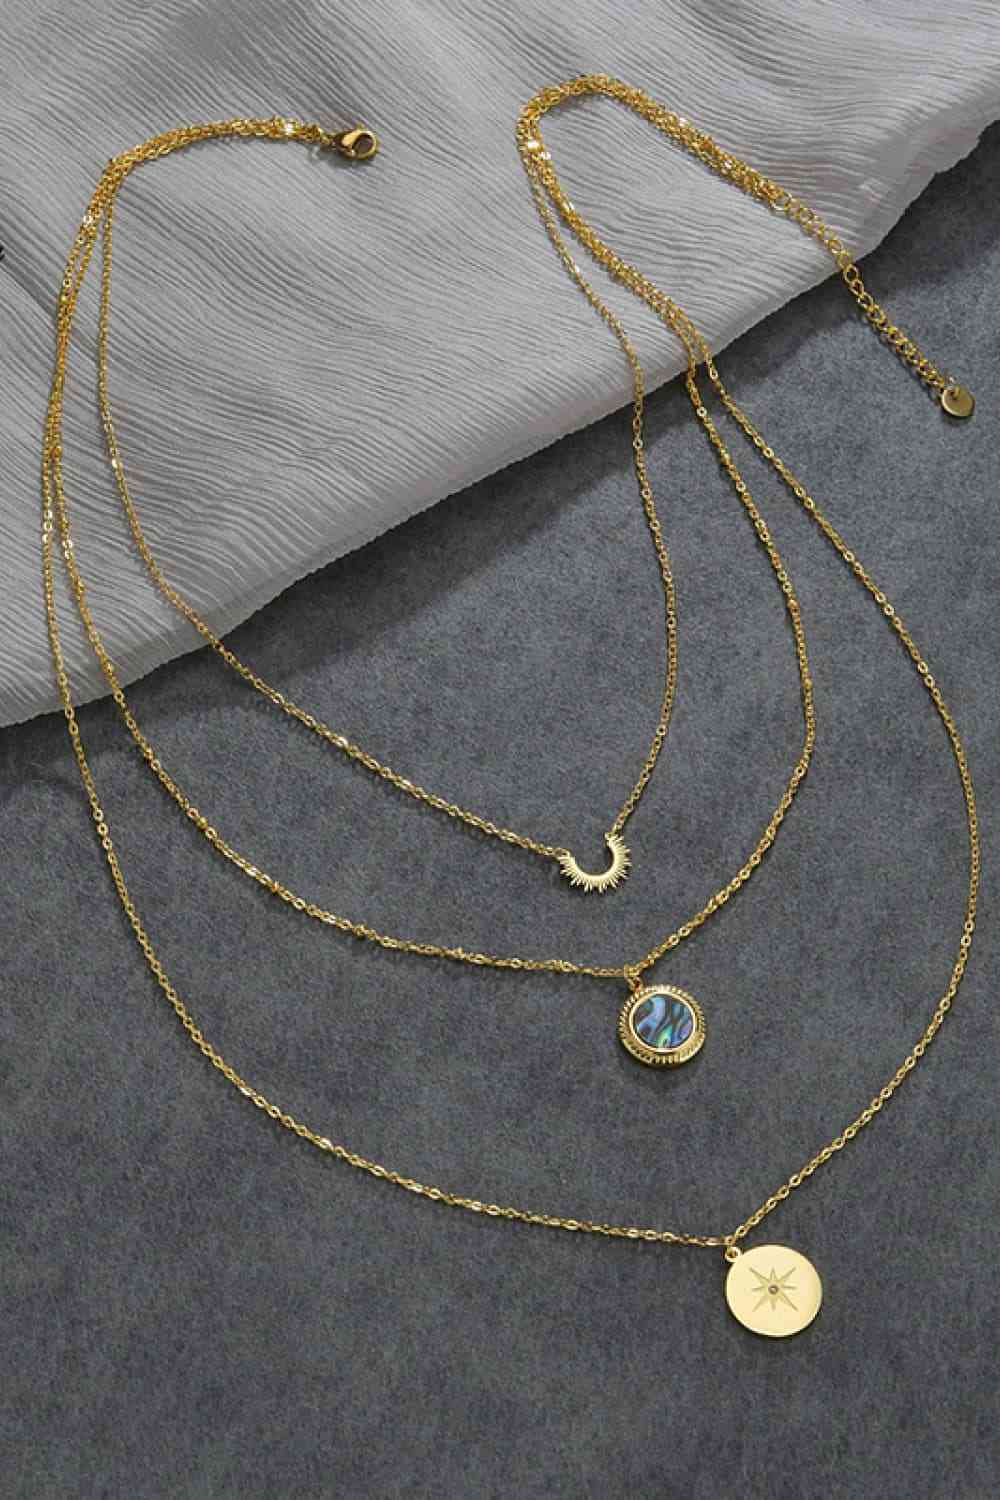 Triple-Layered Stainless Steel Necklace - Everyday-Sales.com